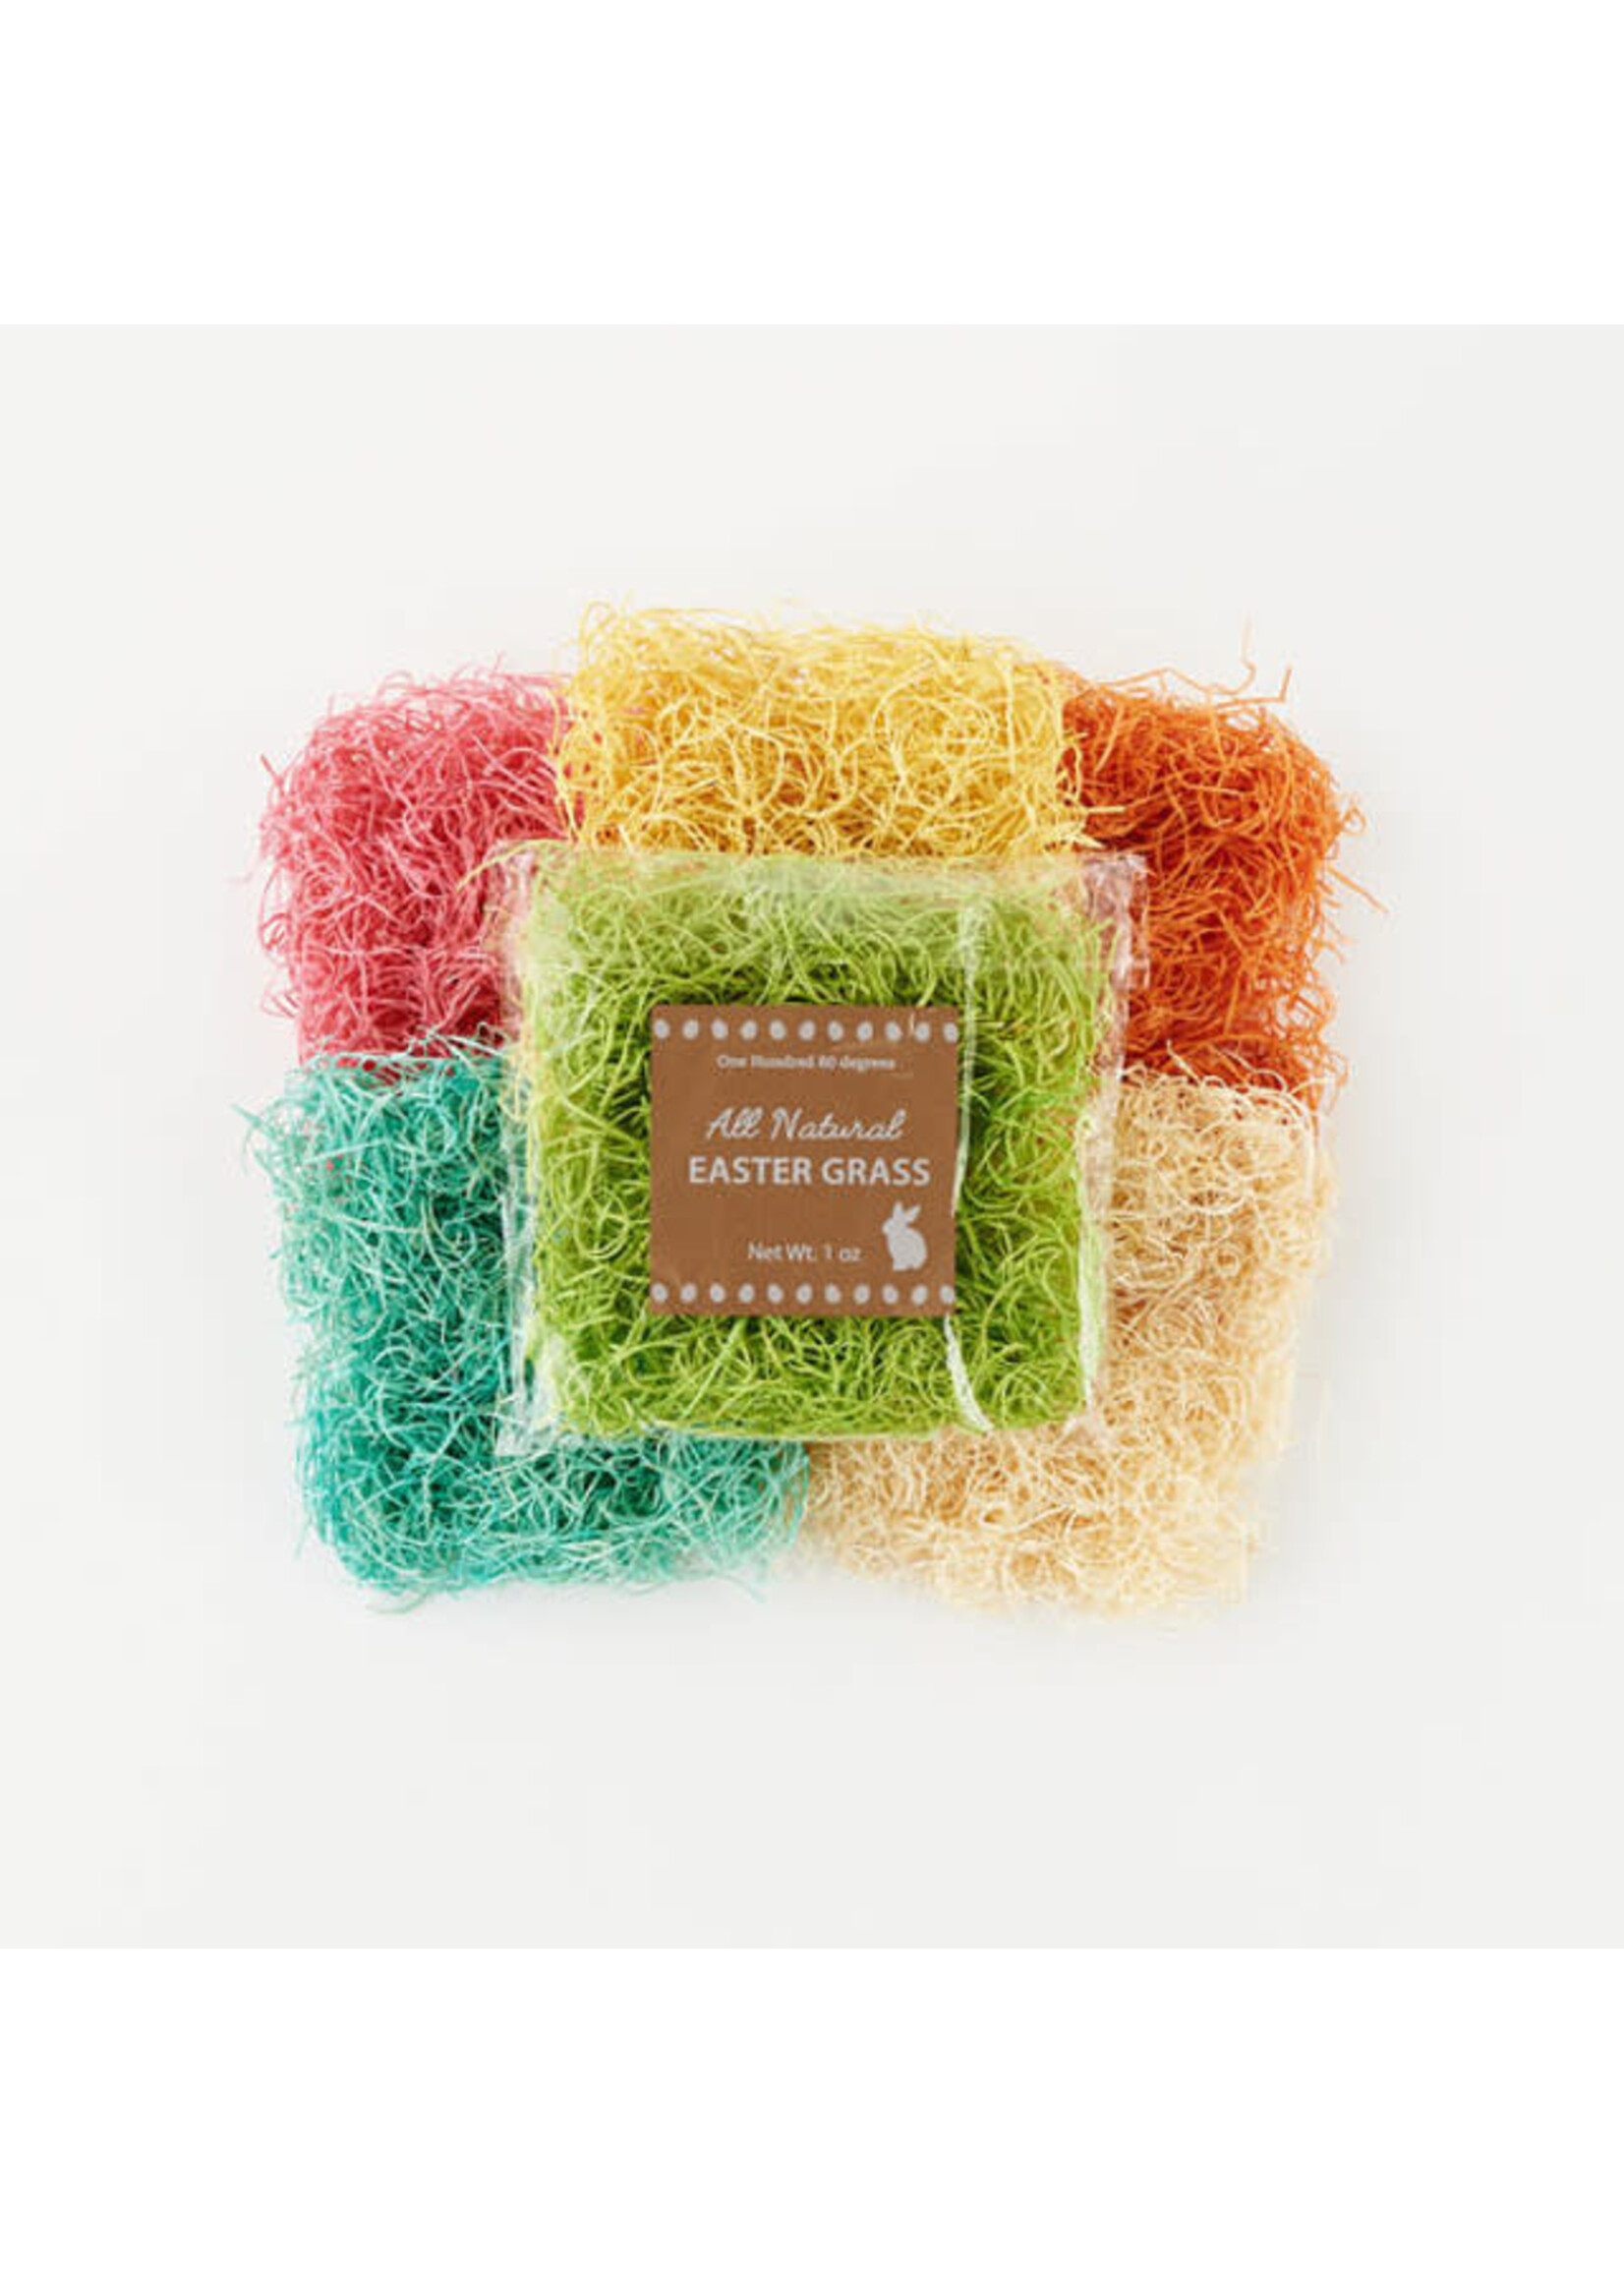 ONE HUNDRED 80 DEGREES Easter Grass in Cello Bags, Natural Fibers 1 oz.